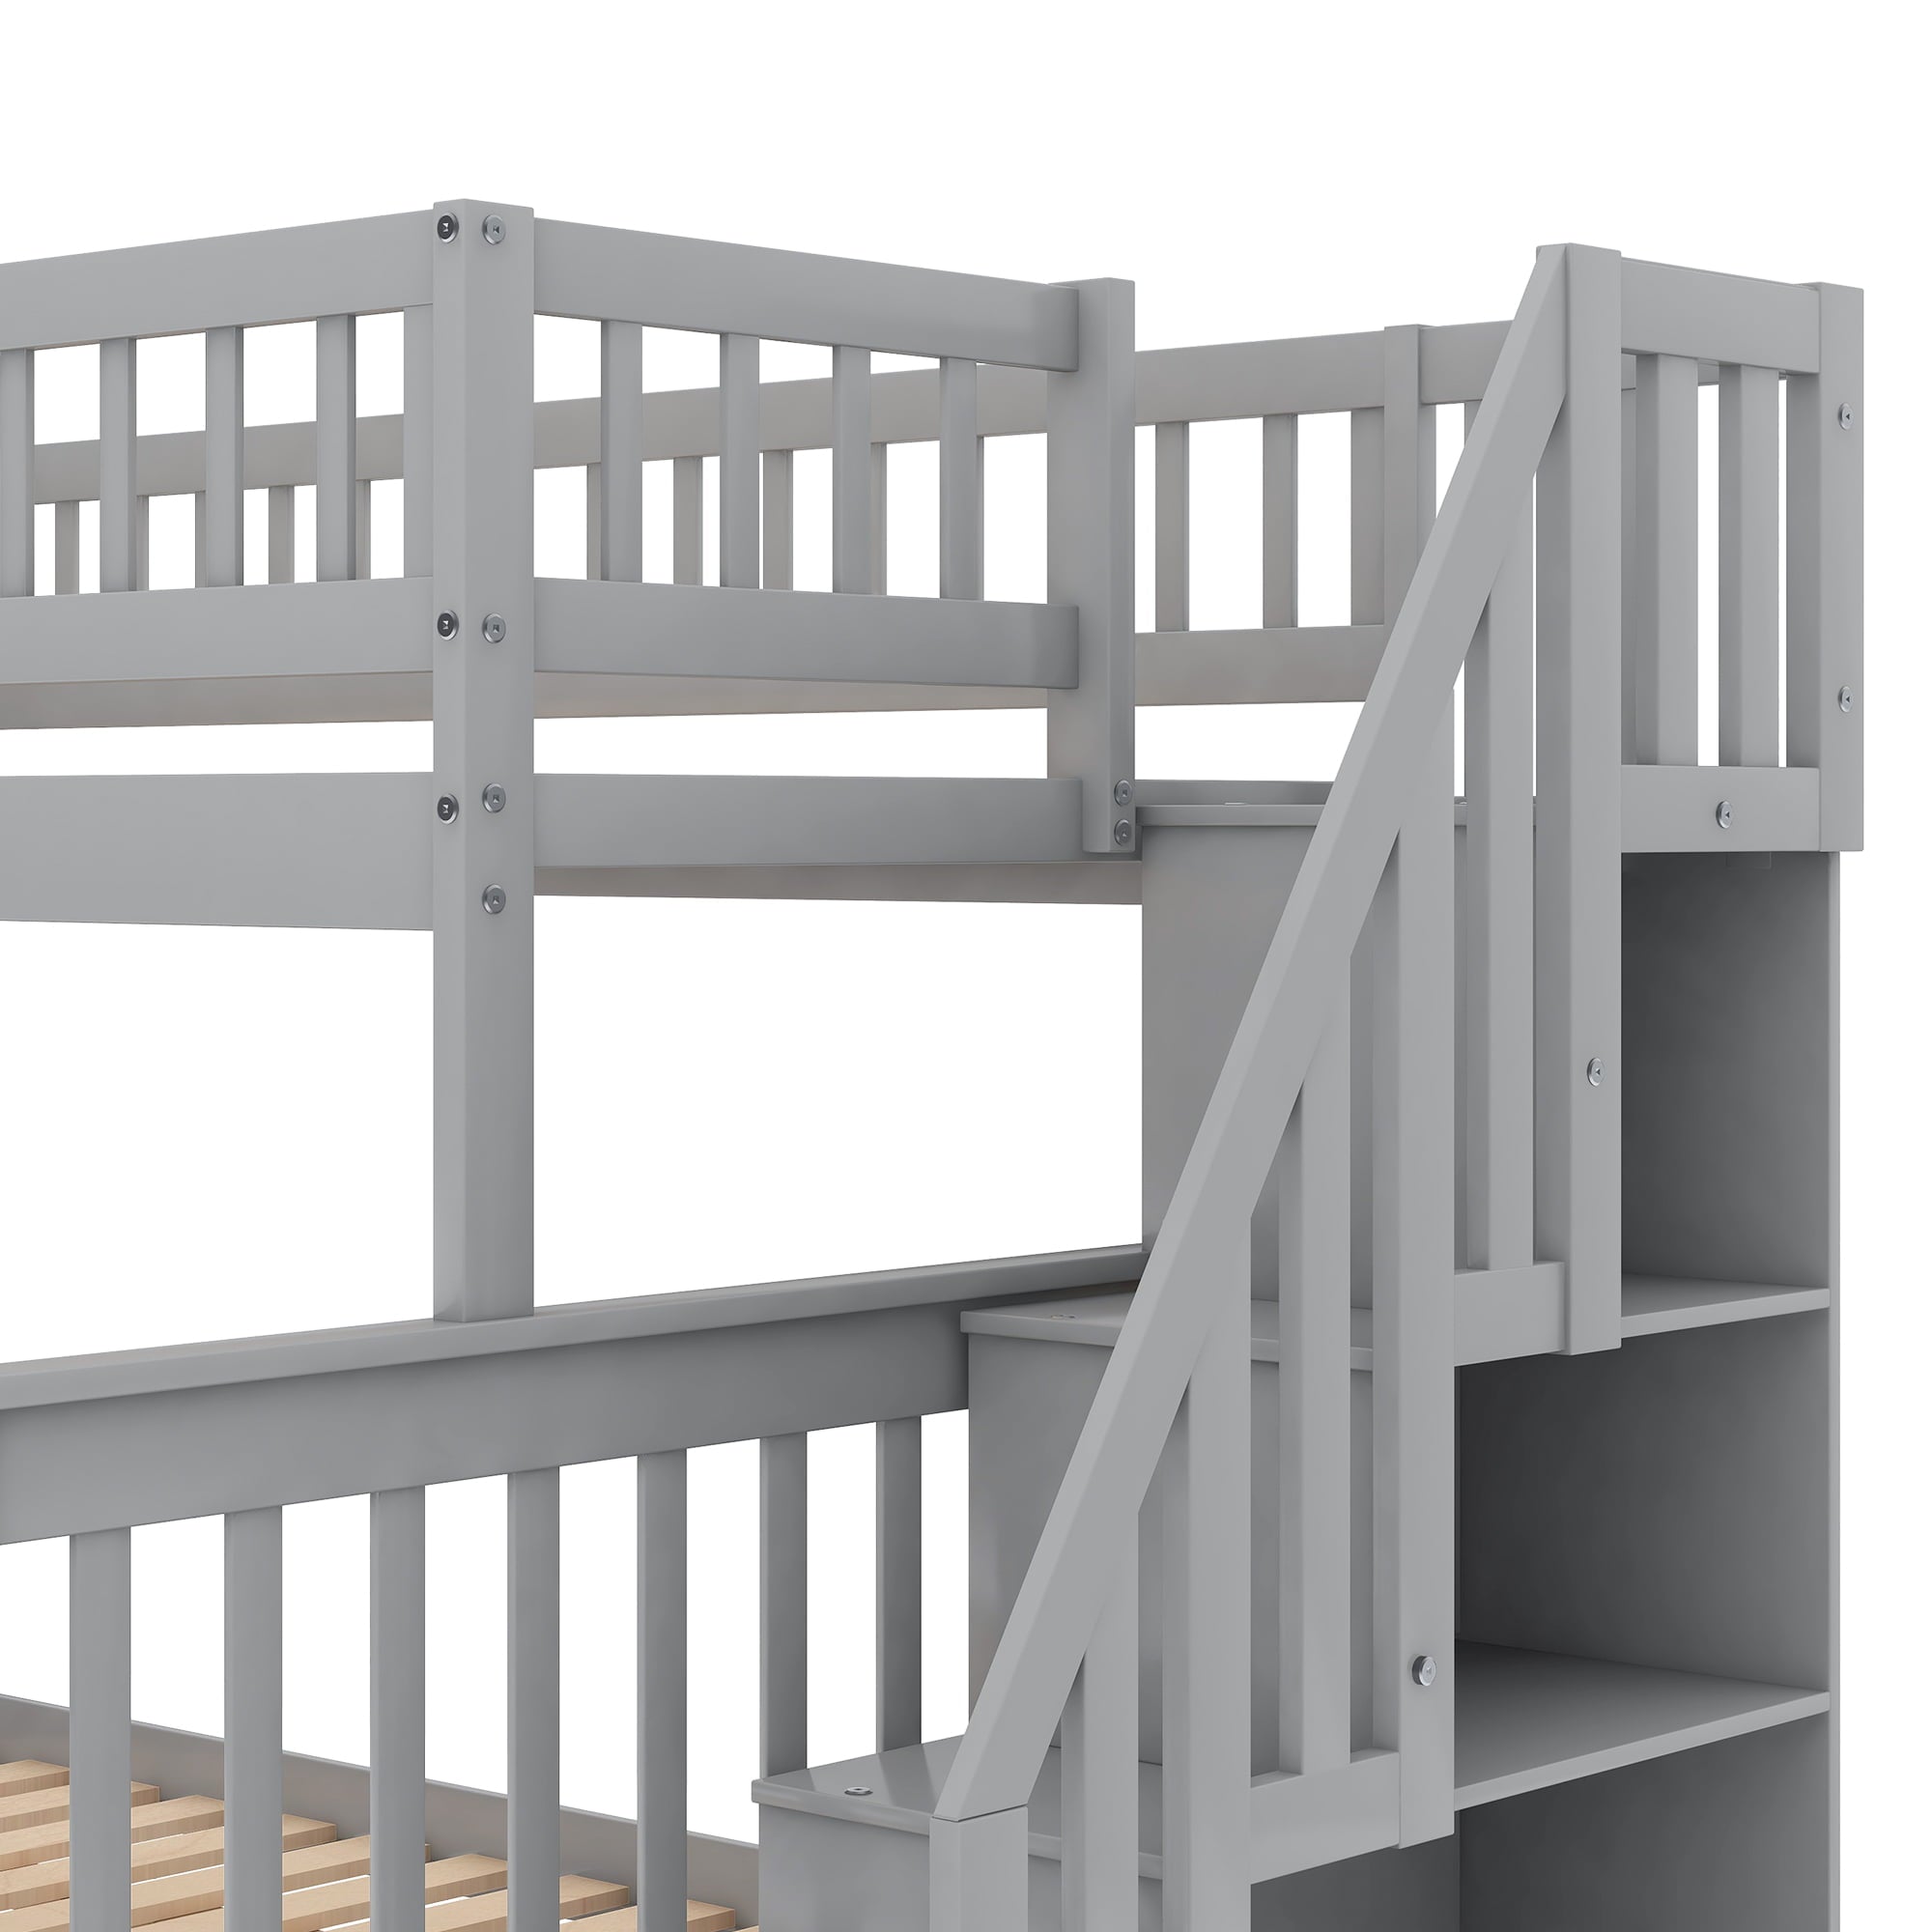 Euroco Twin Over Full Bunk Bed with Stairs and Storage for Kids, Gray